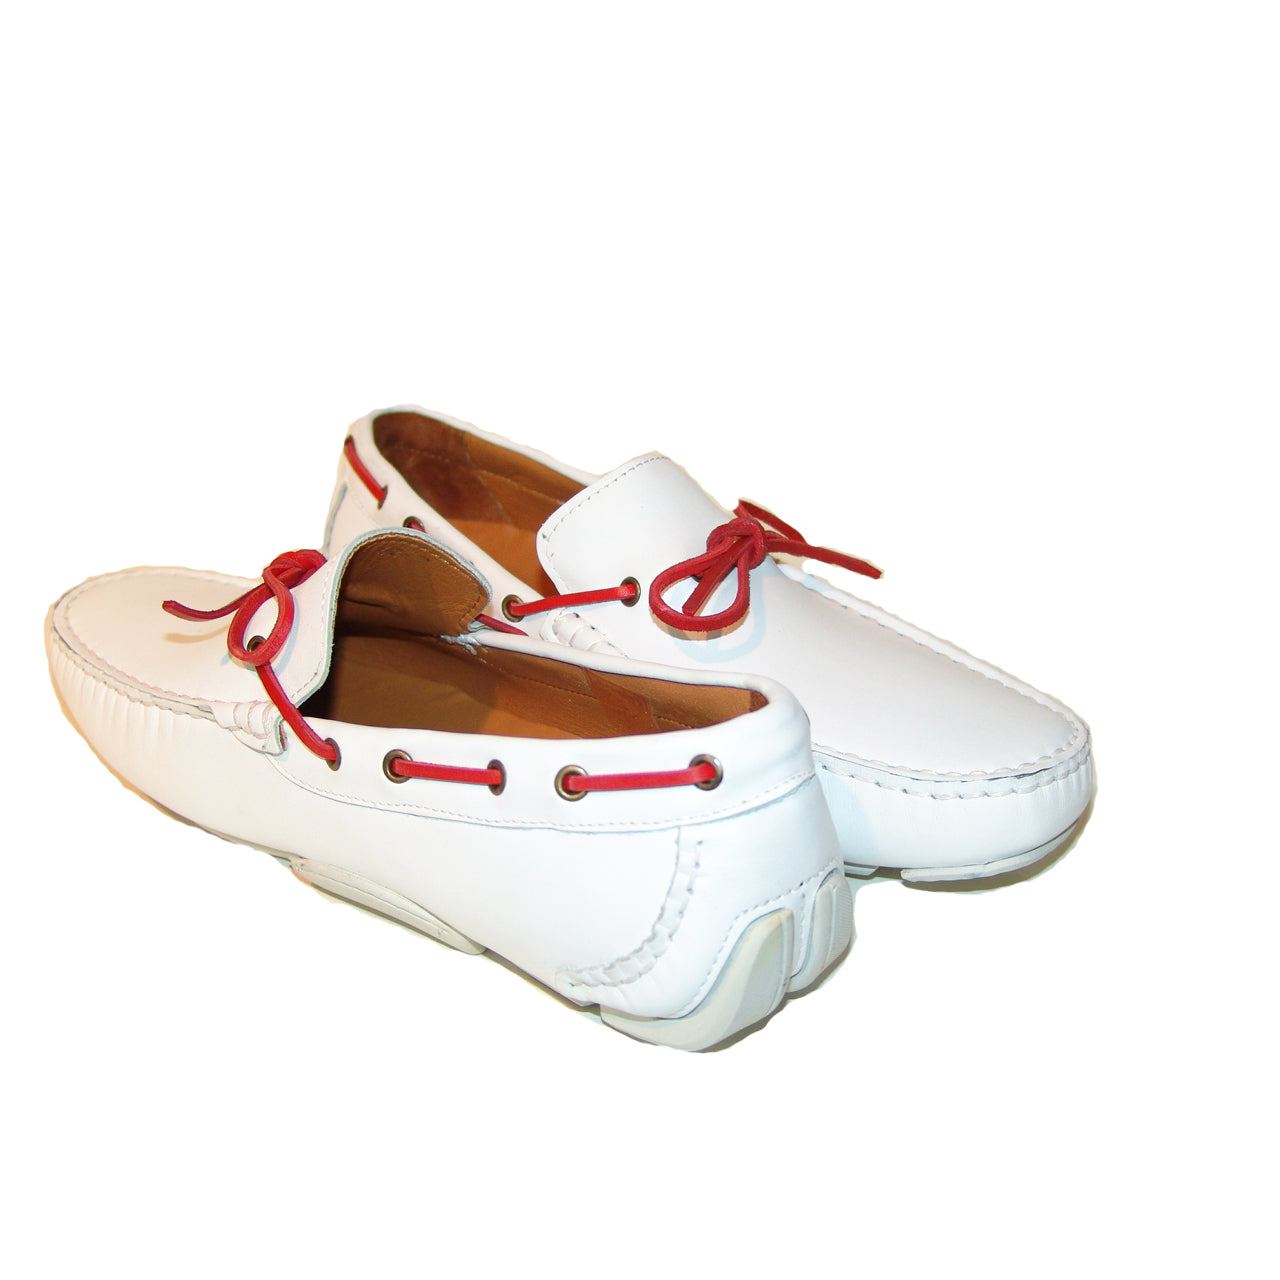 Pelle Line Exclusive 7810 Bow Driving Shoes - White/Red